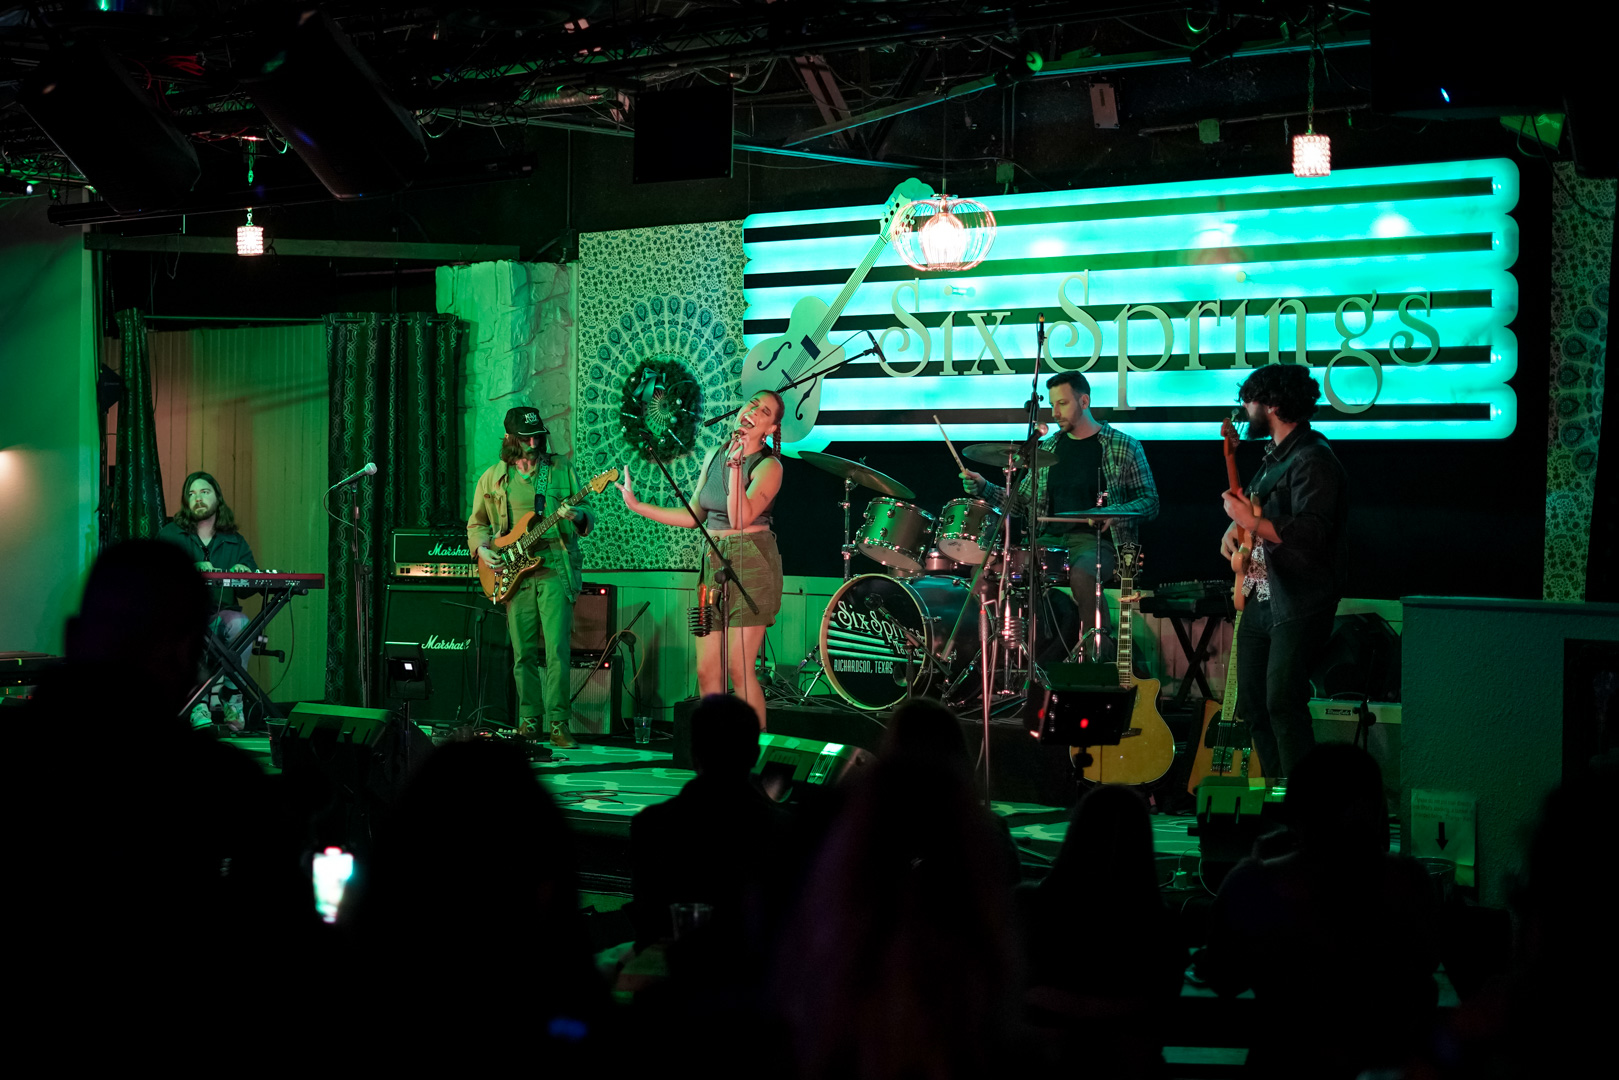 a full band with 5 musicians plays on stage - keys, guitar, vocals, drums, bass